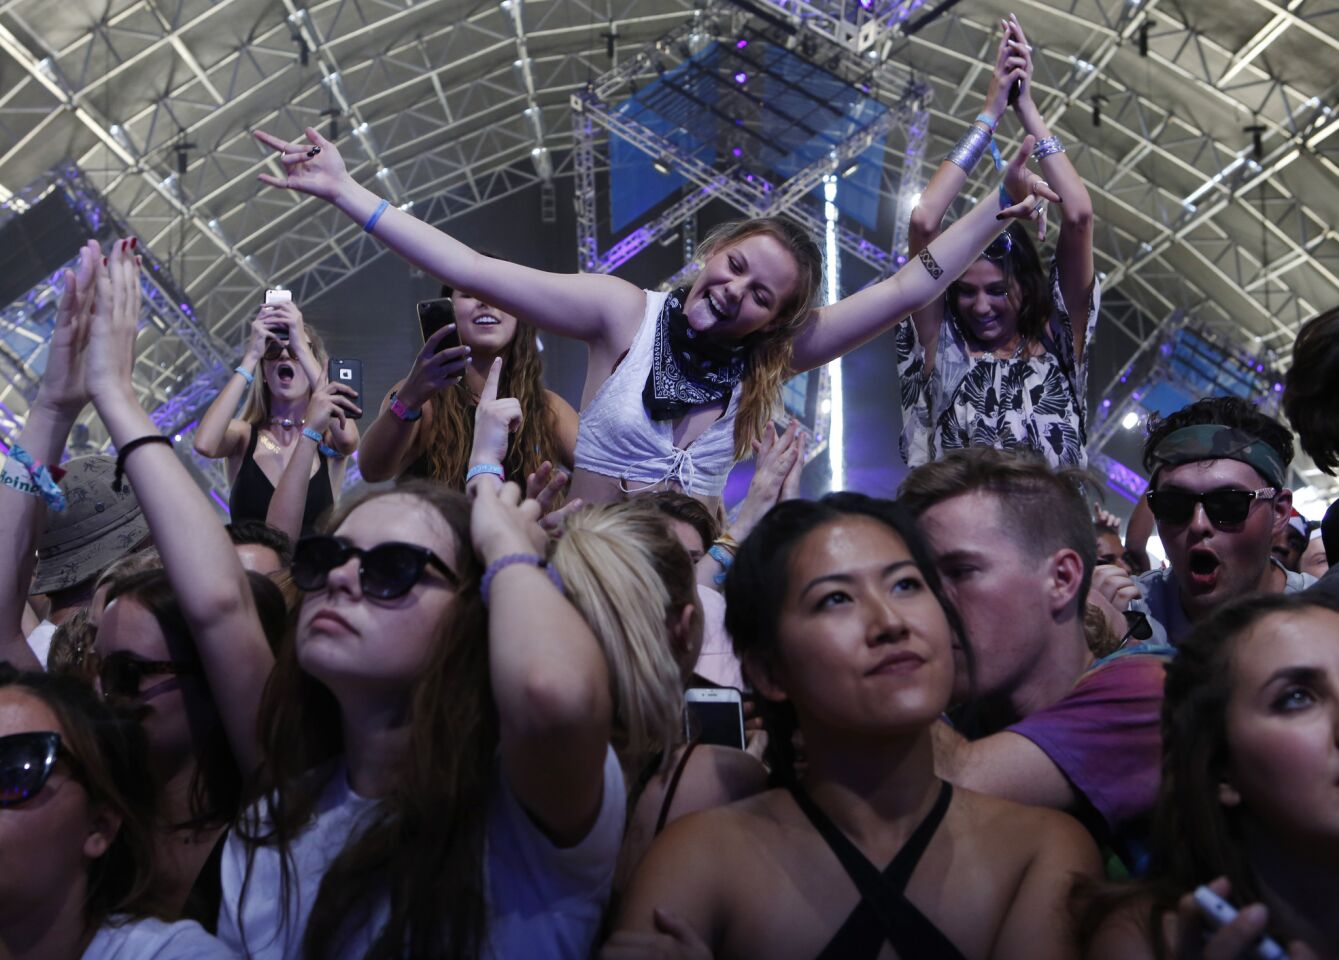 Fans ride on people's shoulders as Vanic performs at Coachella.